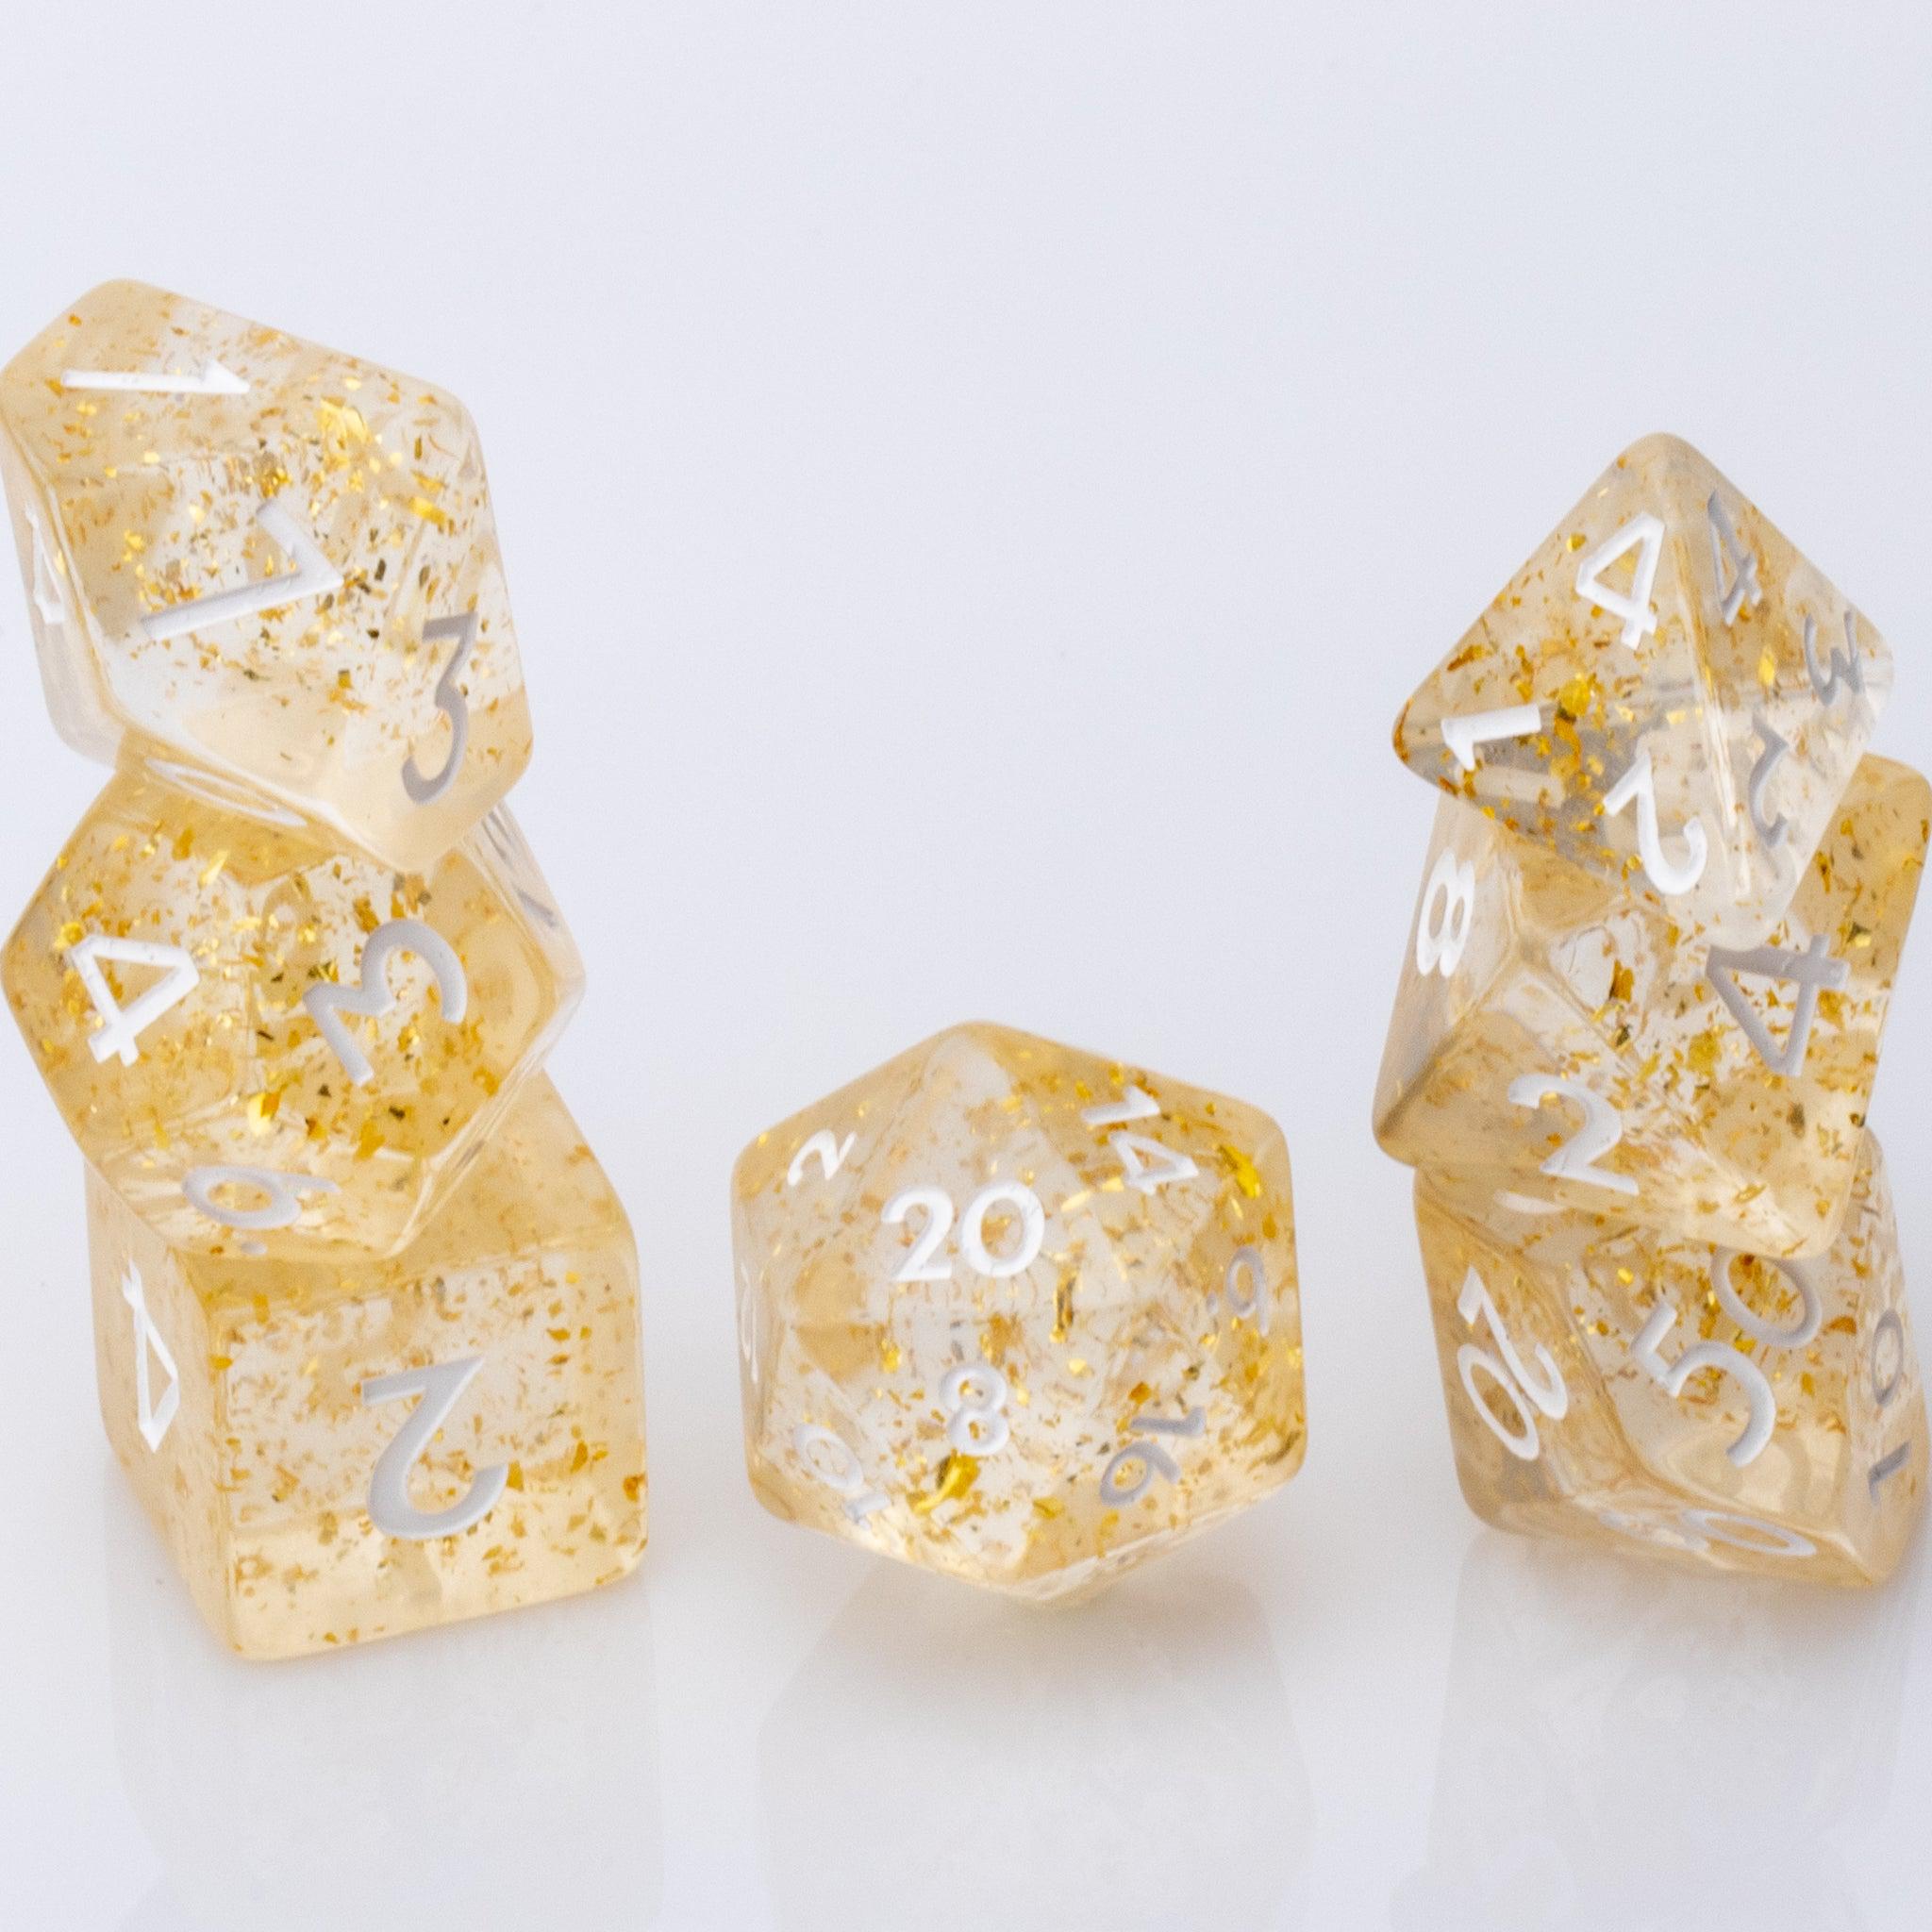 Gold Rush, 7 piece DND Dice Set stacked on a white background.